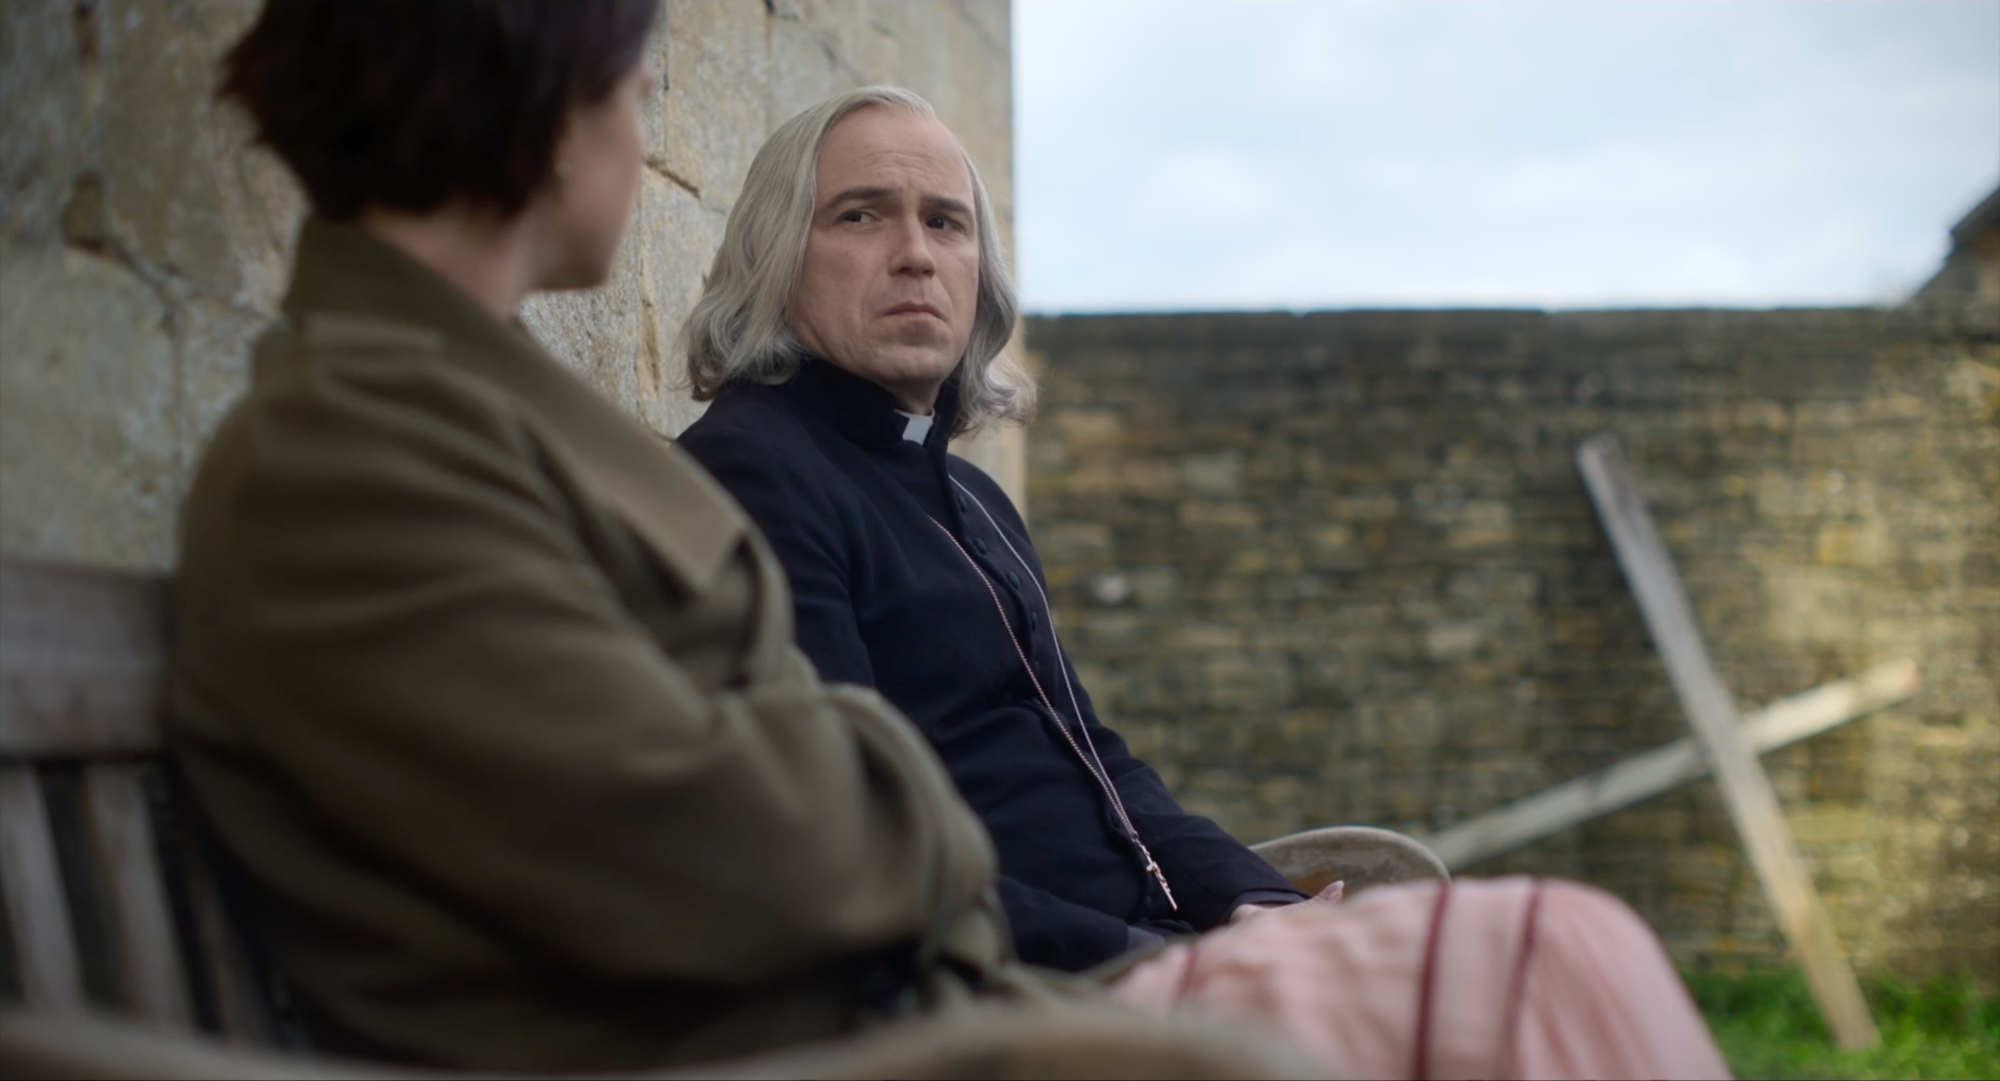 Jessie Buckley as Harper and Rory Kinnear as the priest in 'Men' sitting on a bench looking at each other